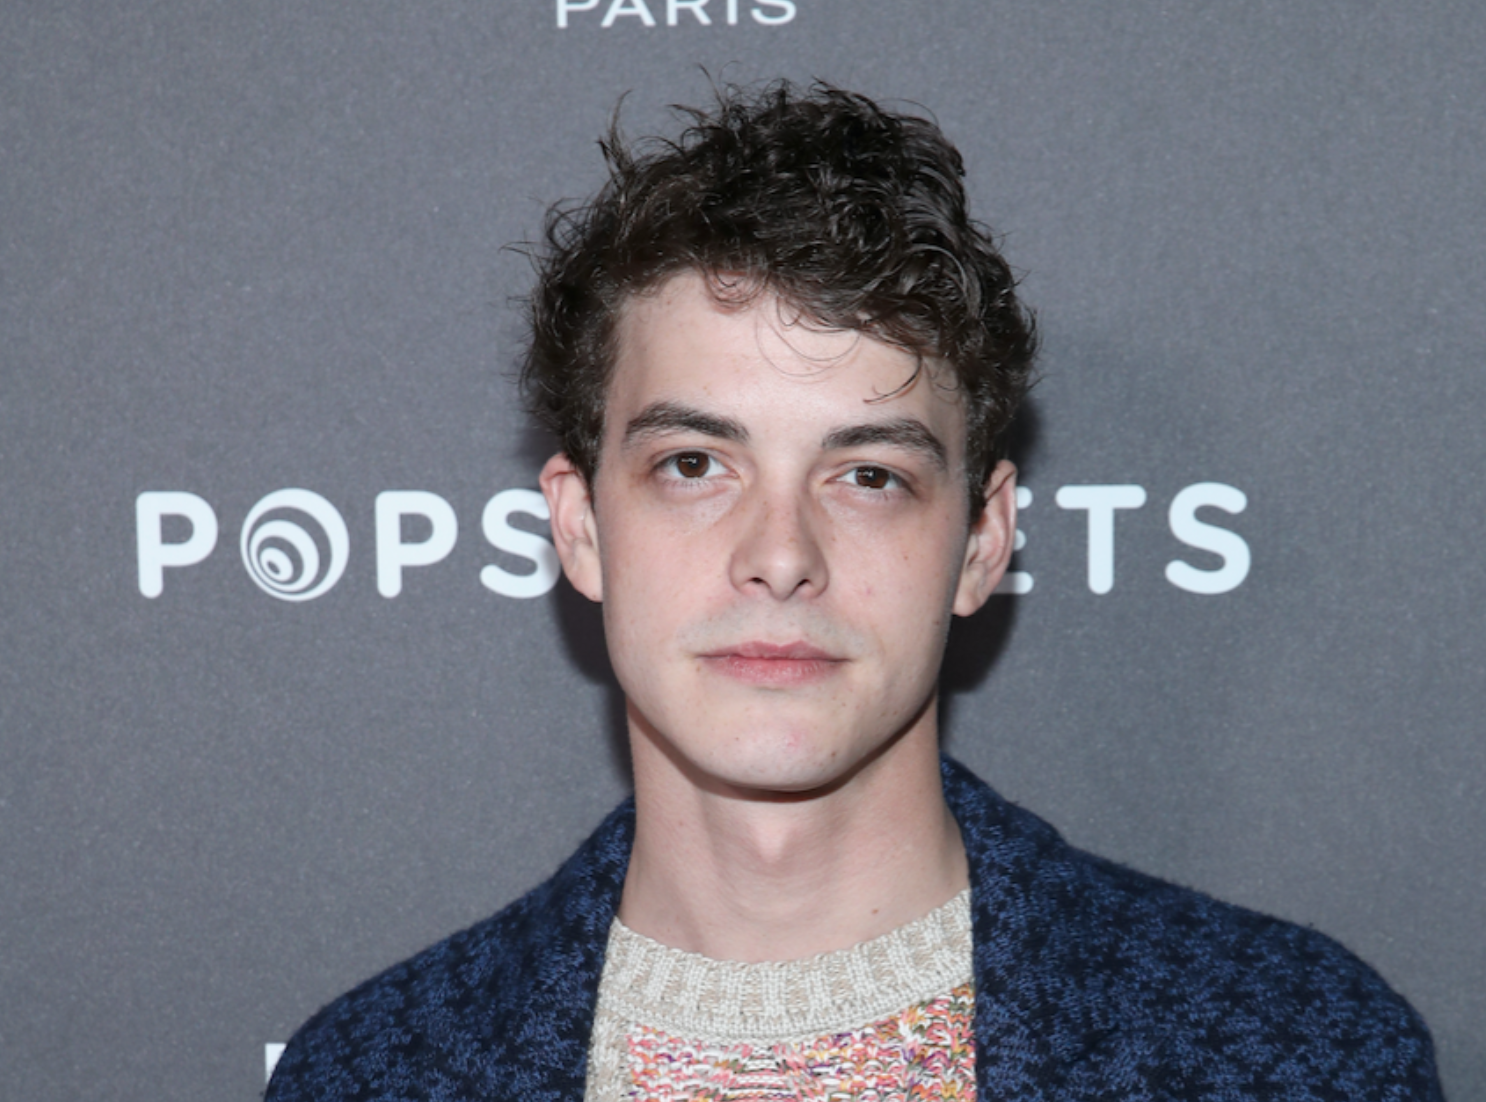 Israel Broussard Teases 'To All the Boys' Sequel, Explains What Makes 'Happy Death Day' Worth Revisiting